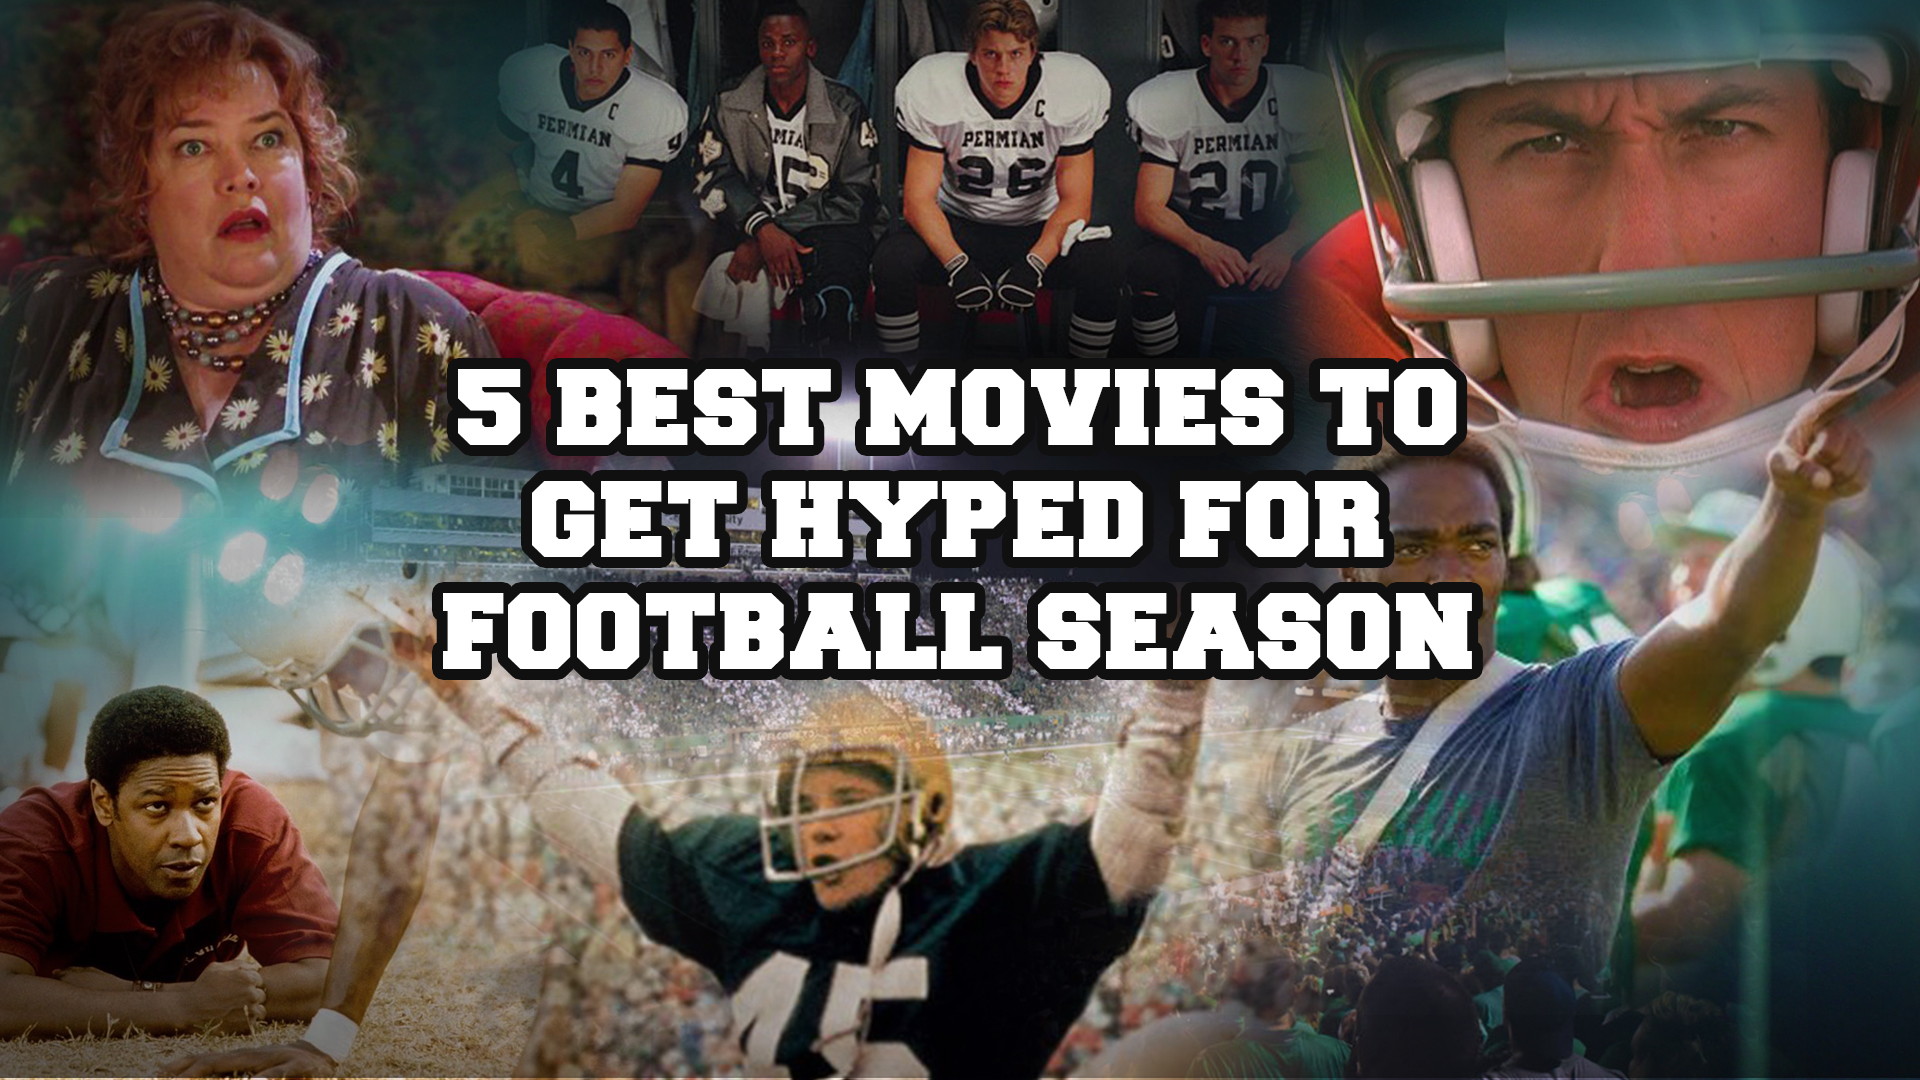 5 Best Movies To Get Hyped For Football Season